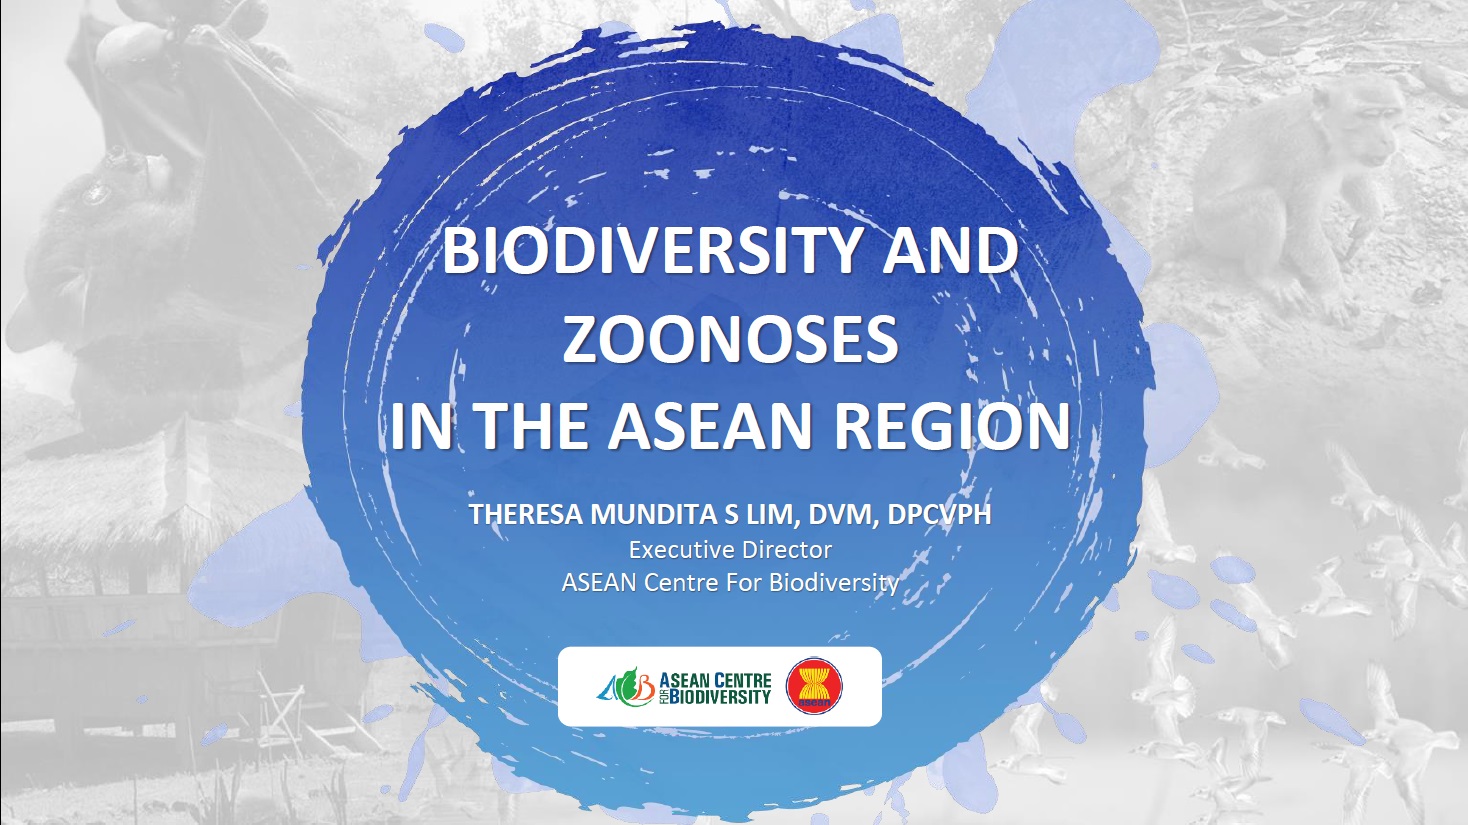 Biodiversity and Zoonoses in the ASEAN Region